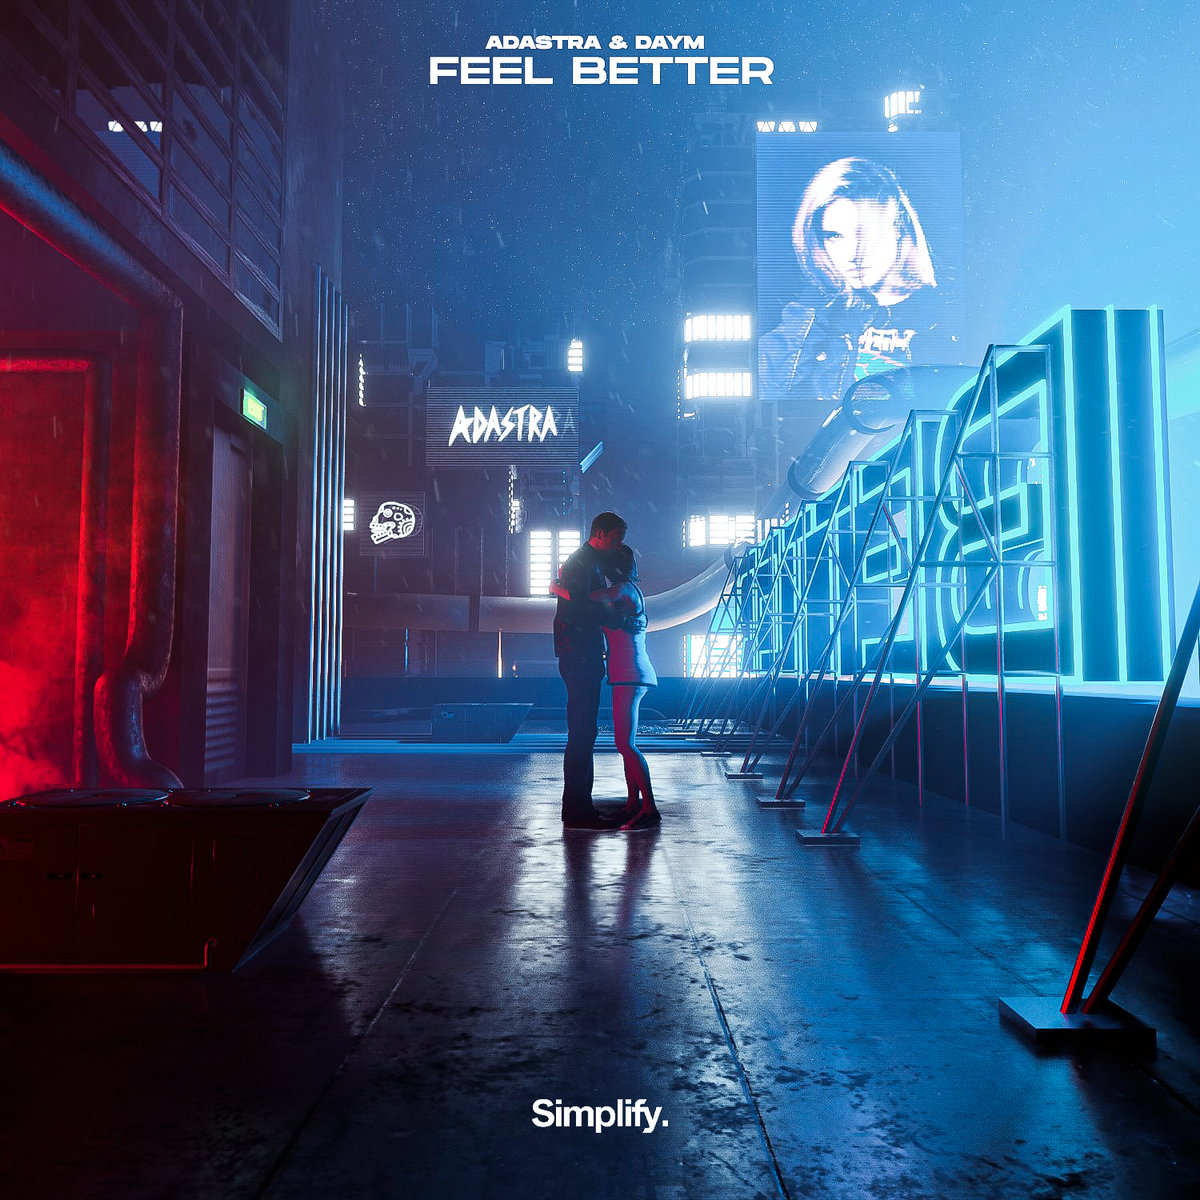 FEATURED LOCAL MUSIC: Feel Better by Adastra & Daym